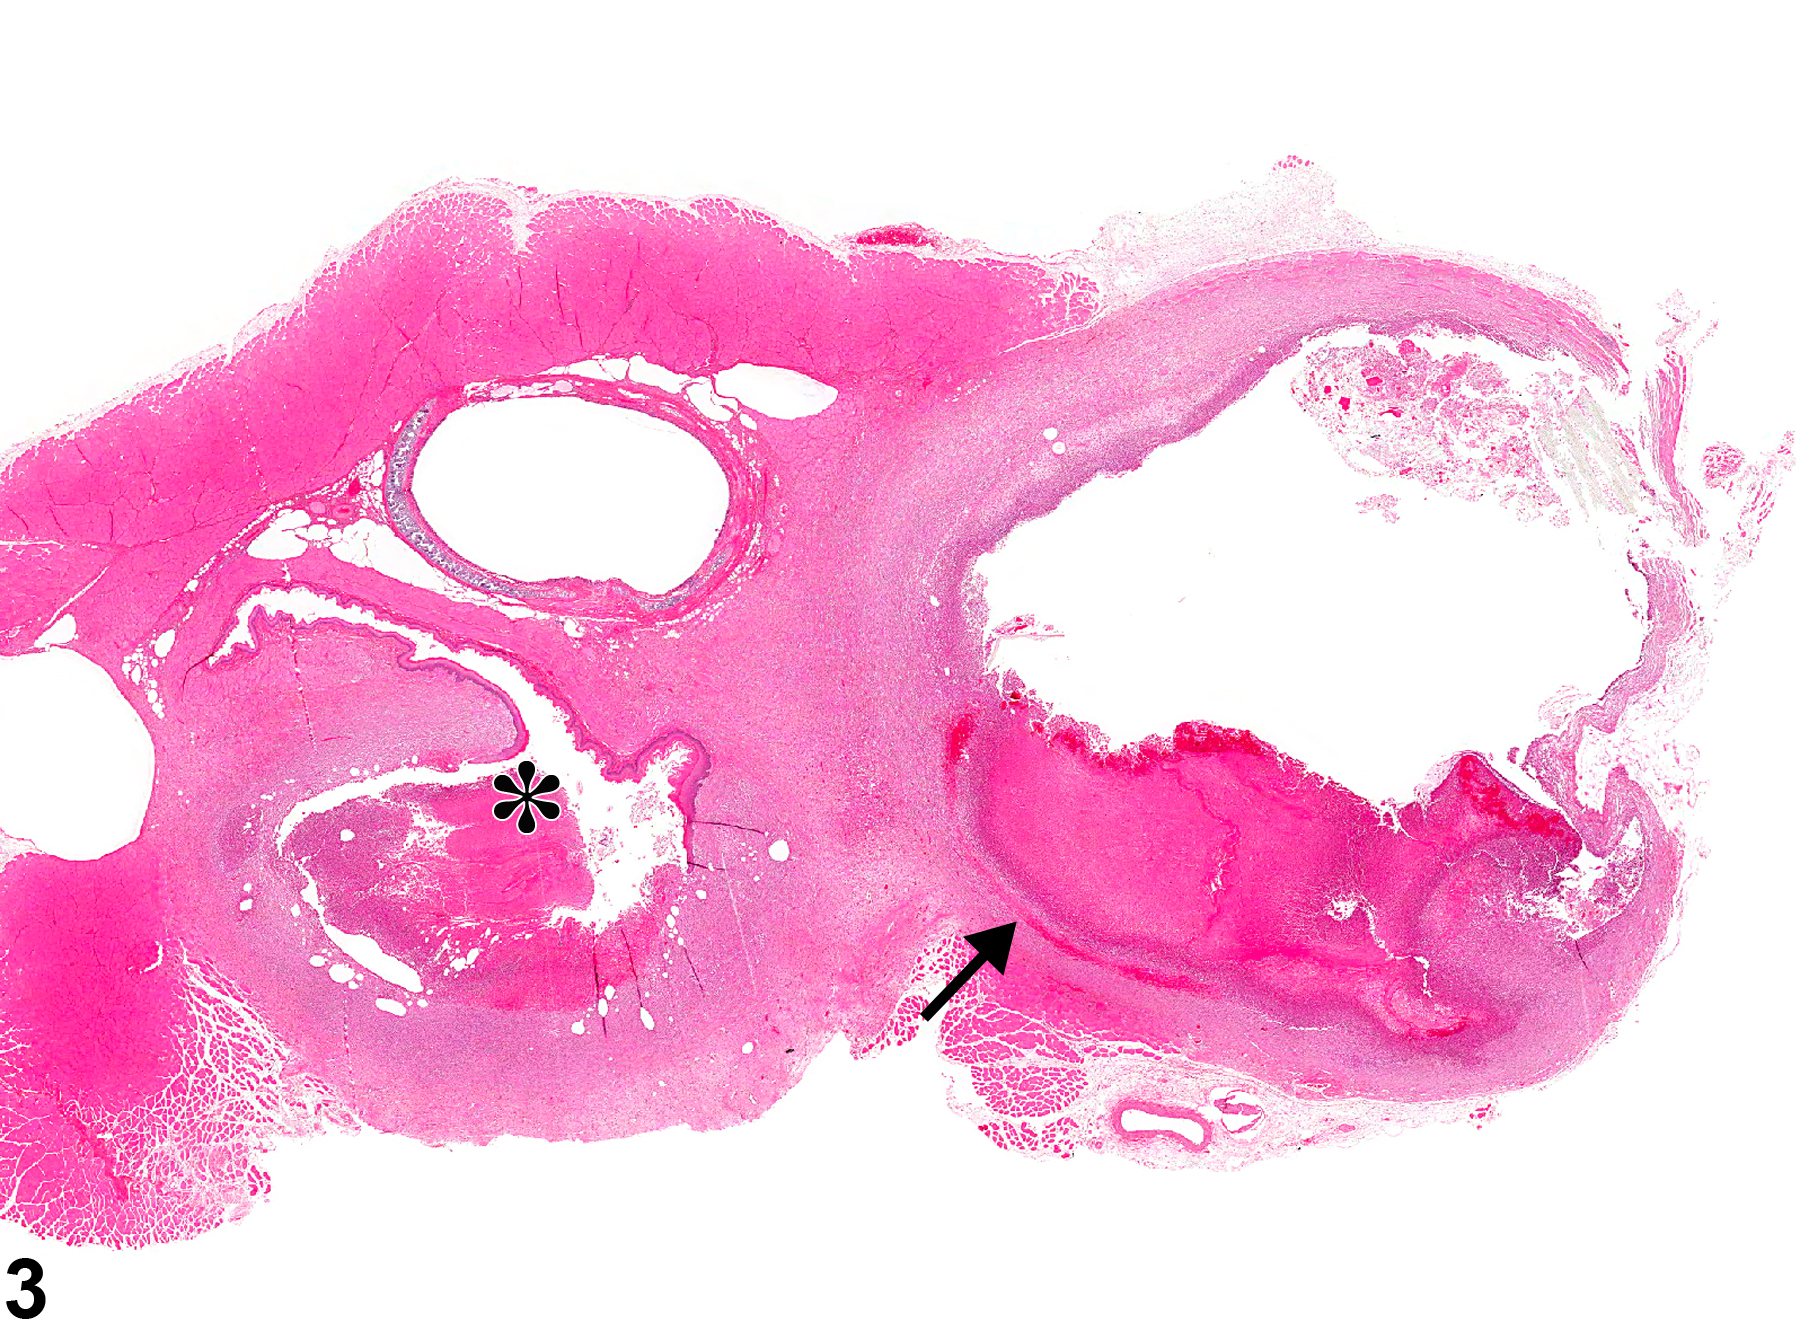 Image of inflammation in the esophagus from a male F344/N rat in a chronic study